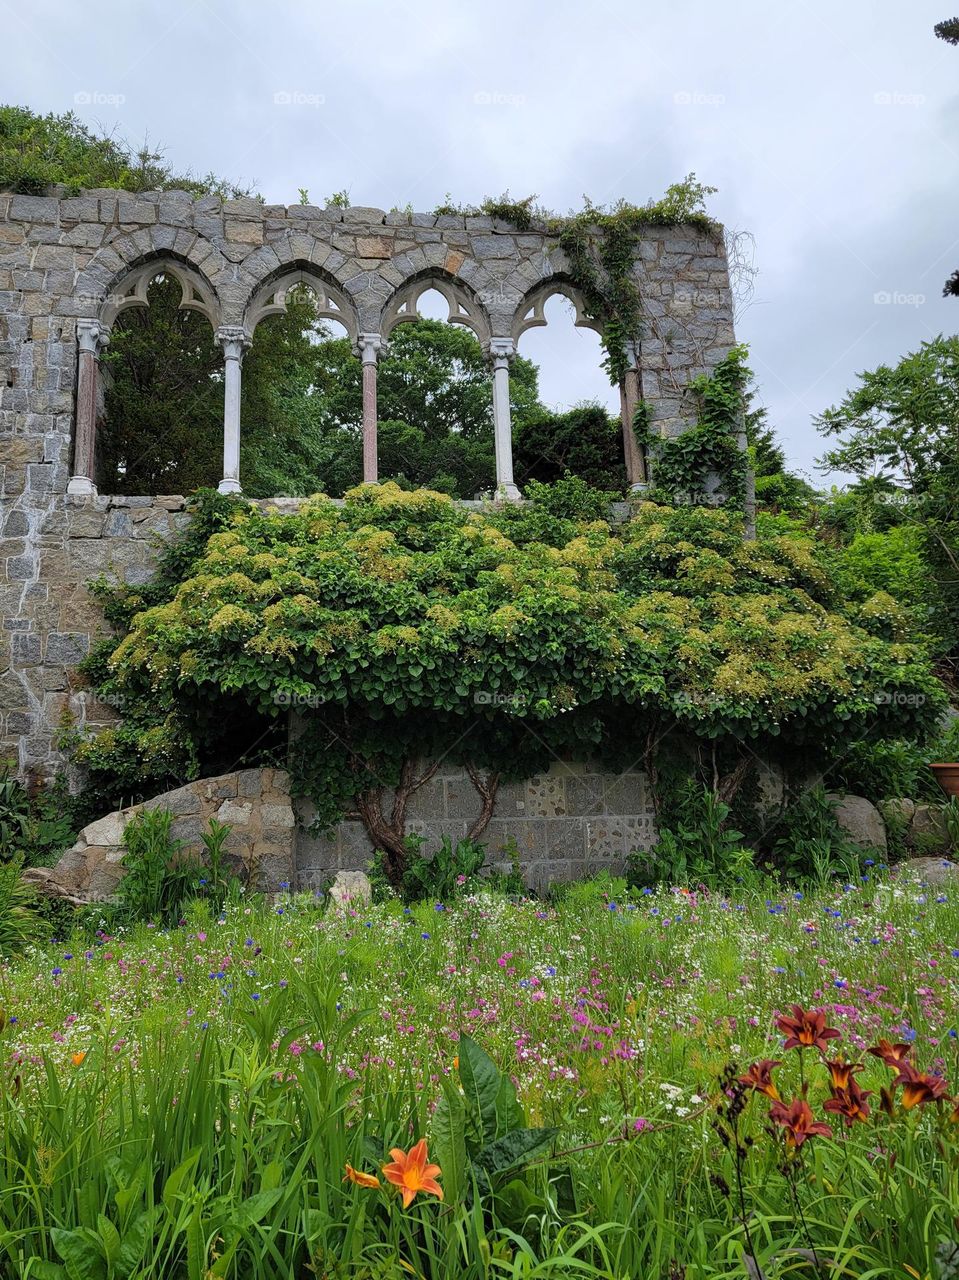 Old Castle Ruins with Wildflowers and Overgrown Grass on a Cloudy Day